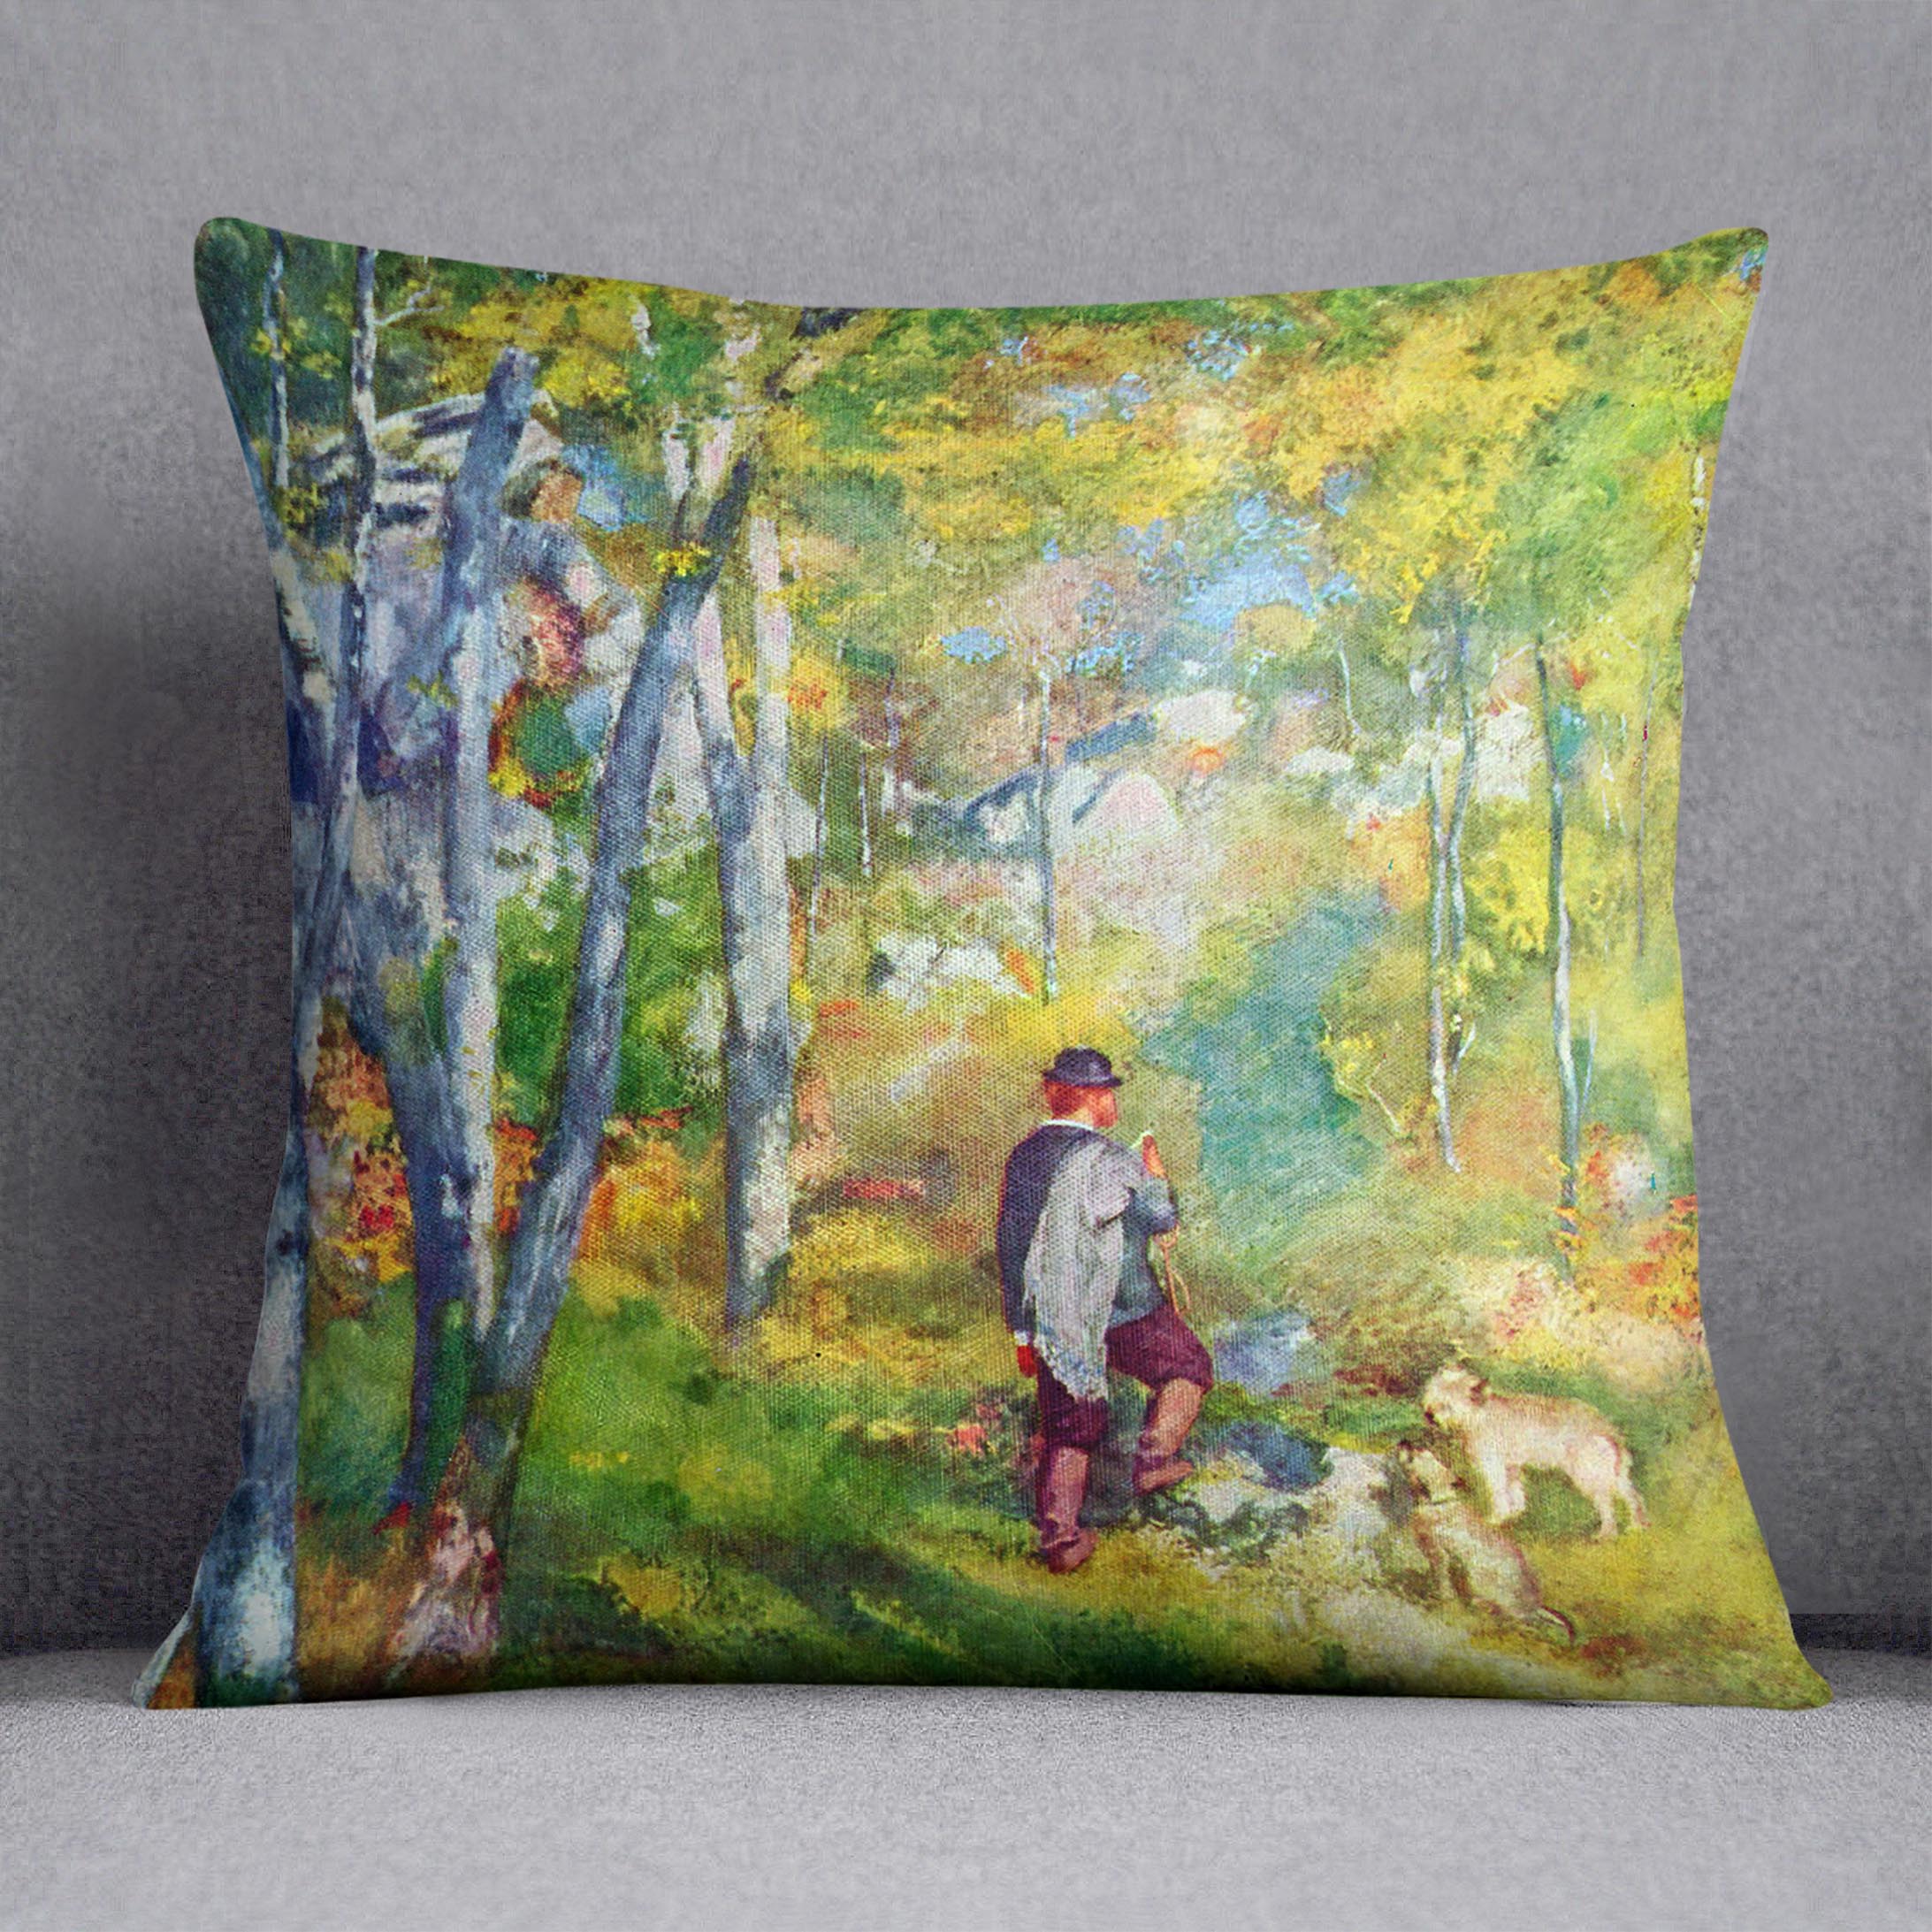 Young man in the forest of Fontainebleau by Renoir Cushion